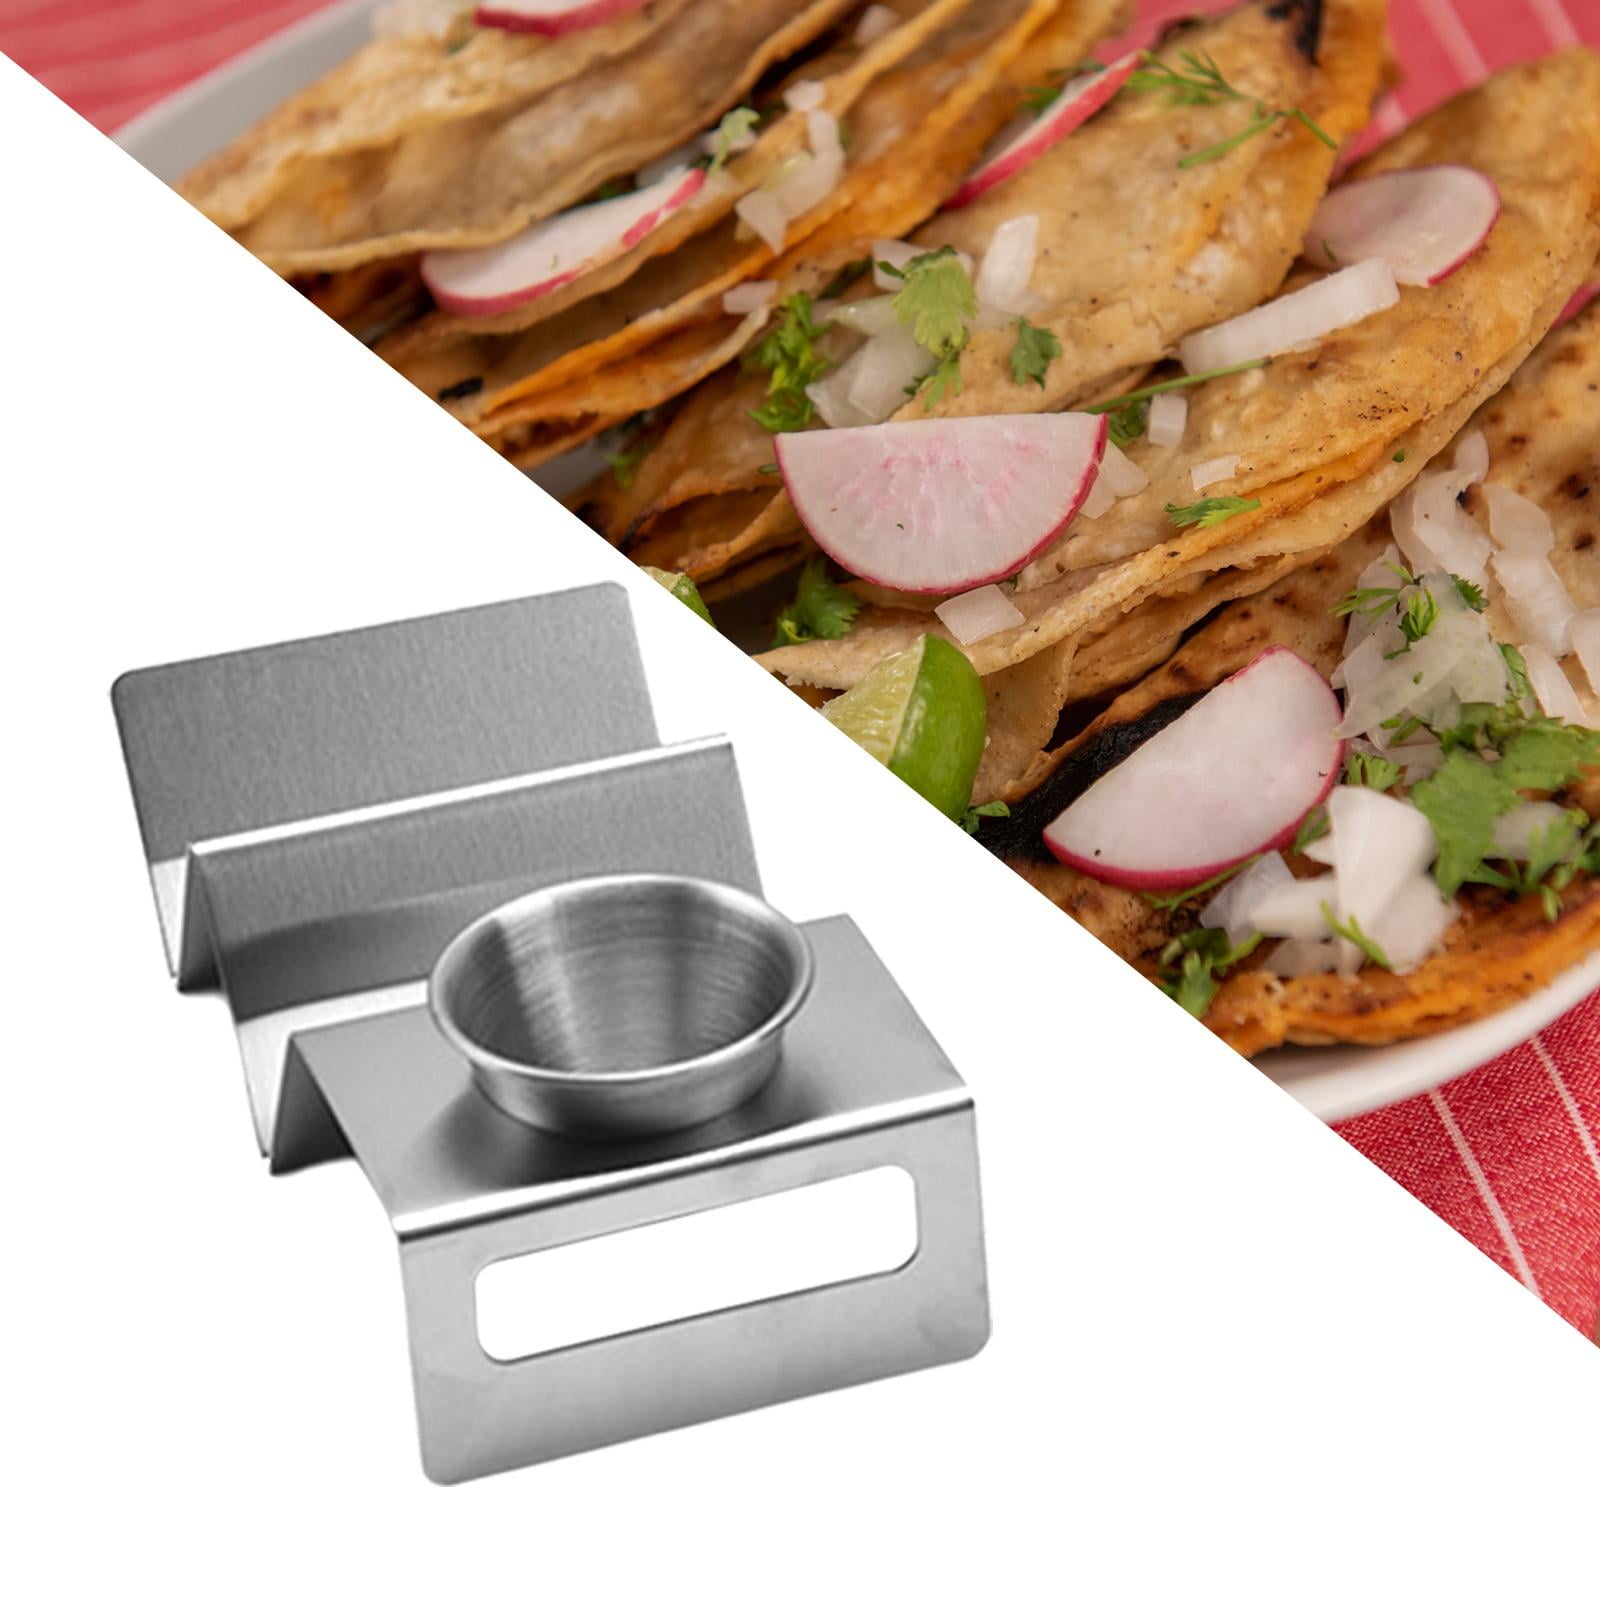 Details about   Taco Stand Holder Kitchen Gadgets Accessories Hot Dog Food Racks Stainless Steel 